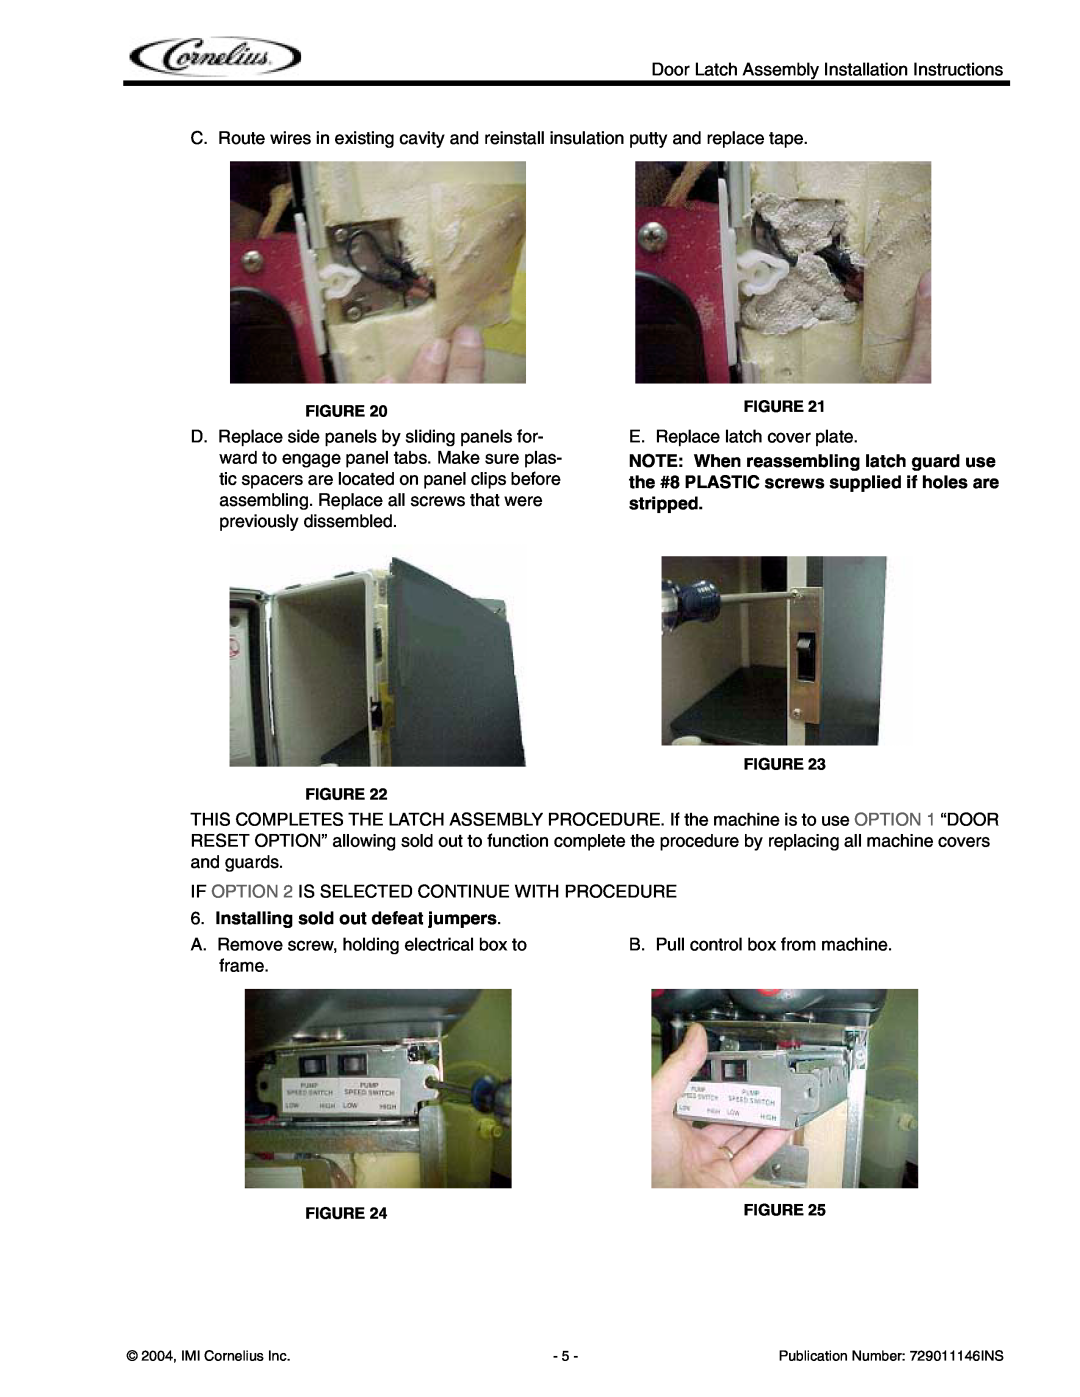 Cornelius Door Latch installation instructions Installing sold out defeat jumpers 